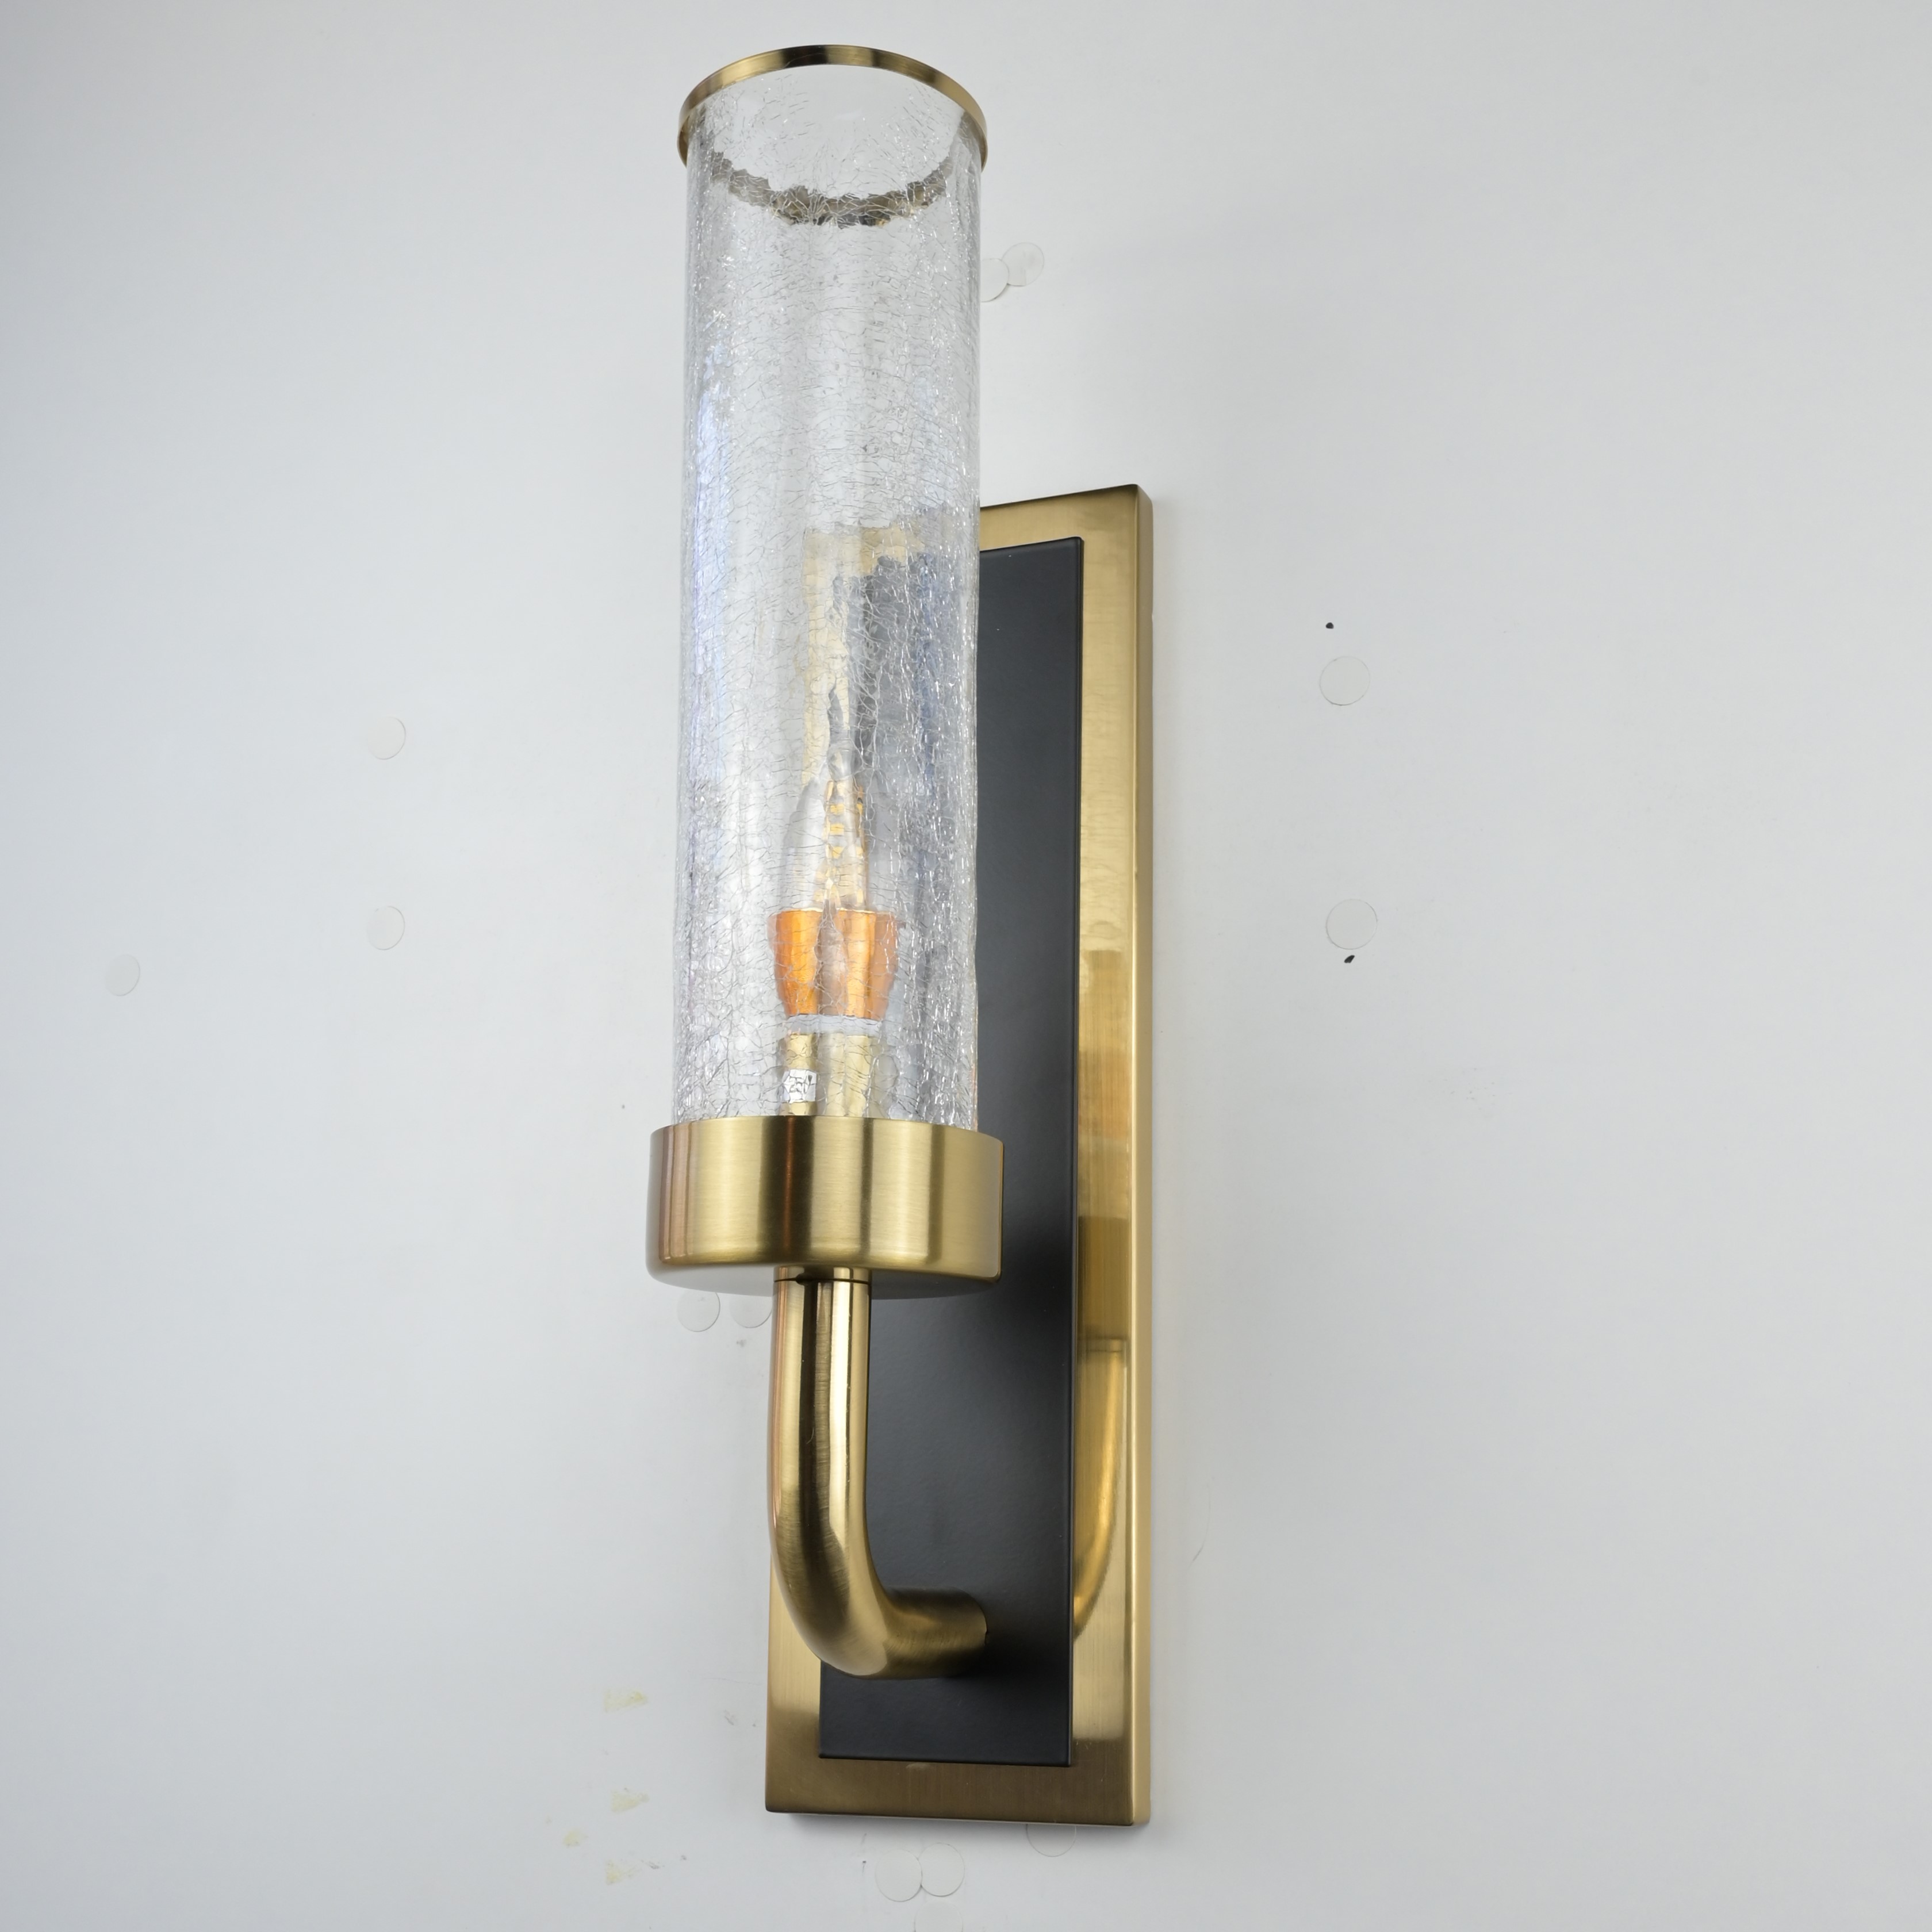 Бра Hudson Valley 1721-Agb Soriano 1 Light Wall Sconce In Aged Brass от Imperiumloft 143940-22